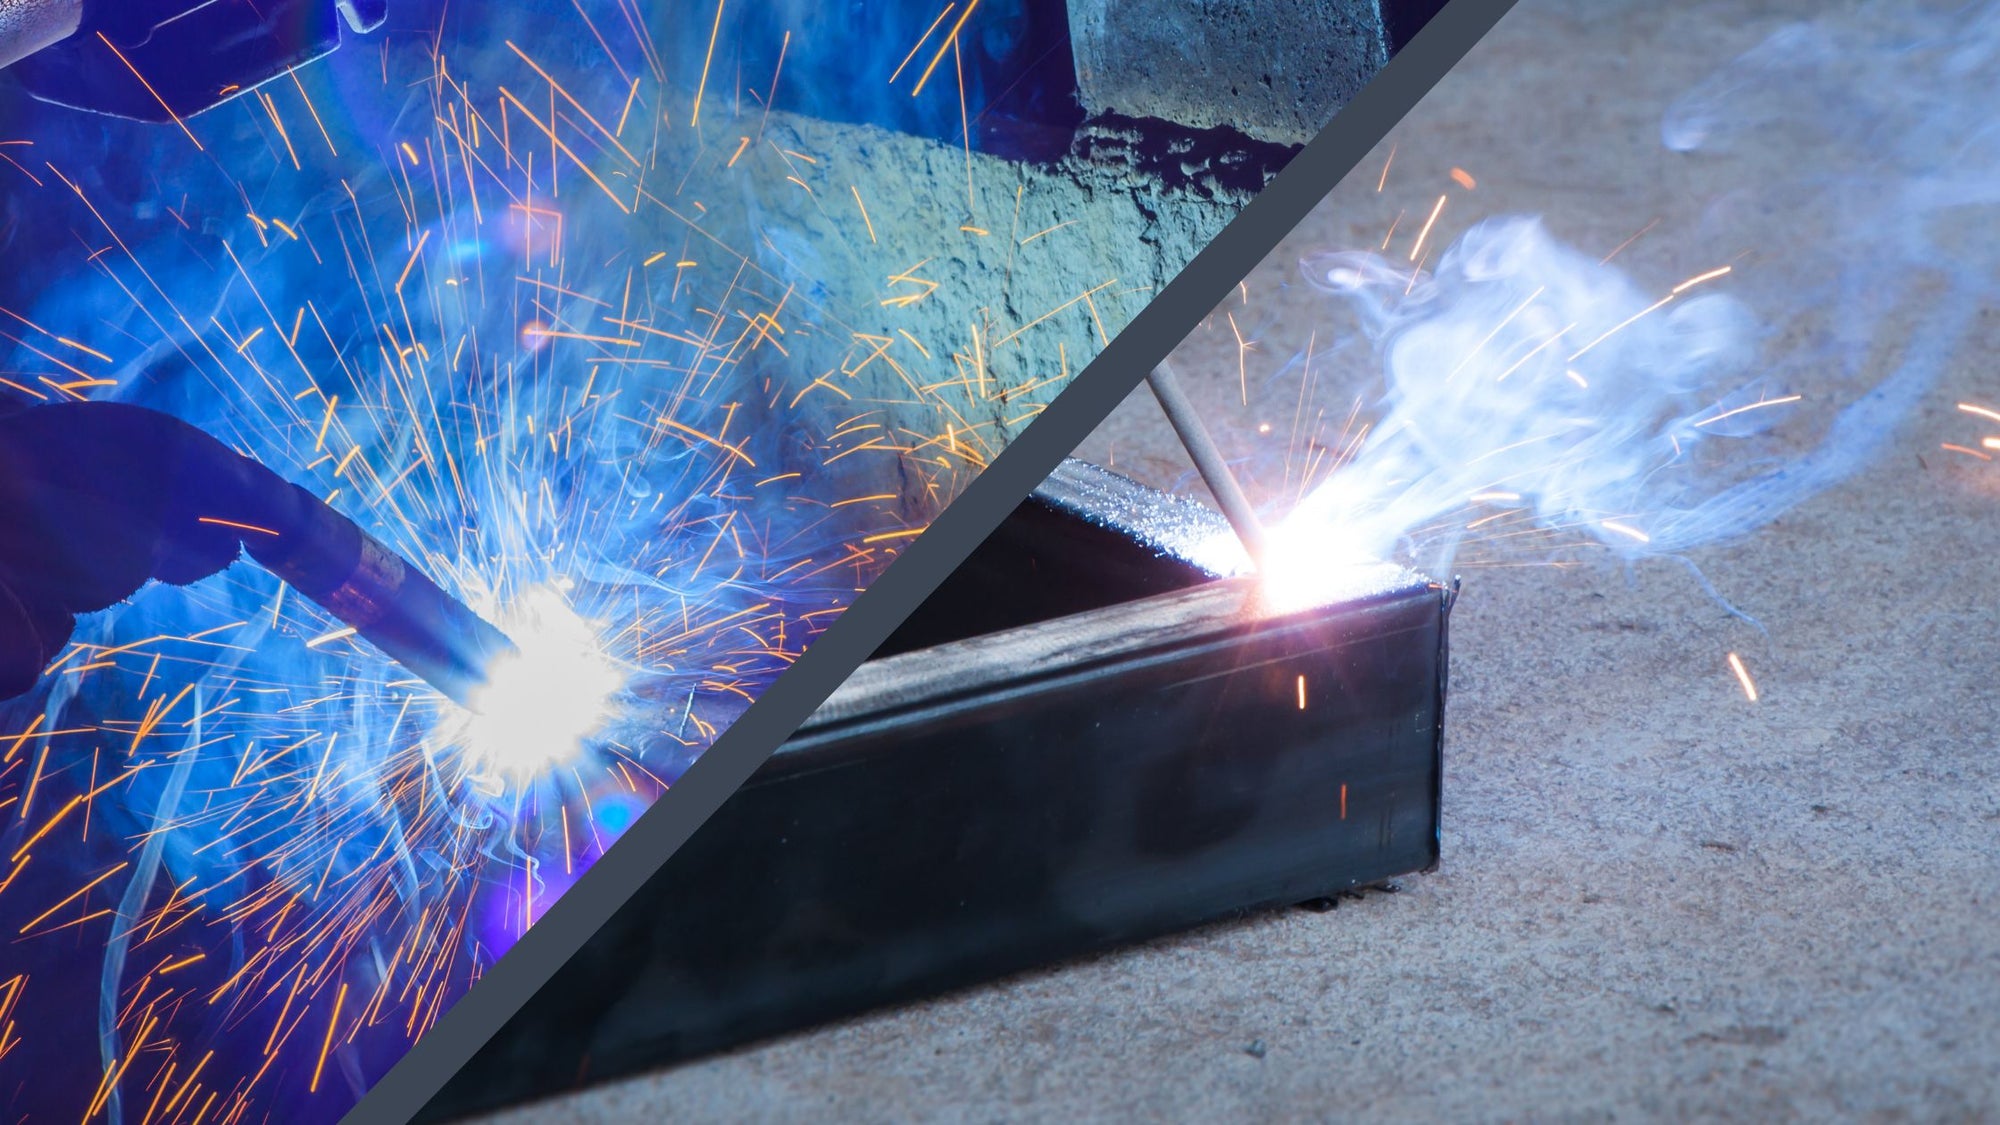 MIG Welding vs. Stick Welding: Pros and Cons